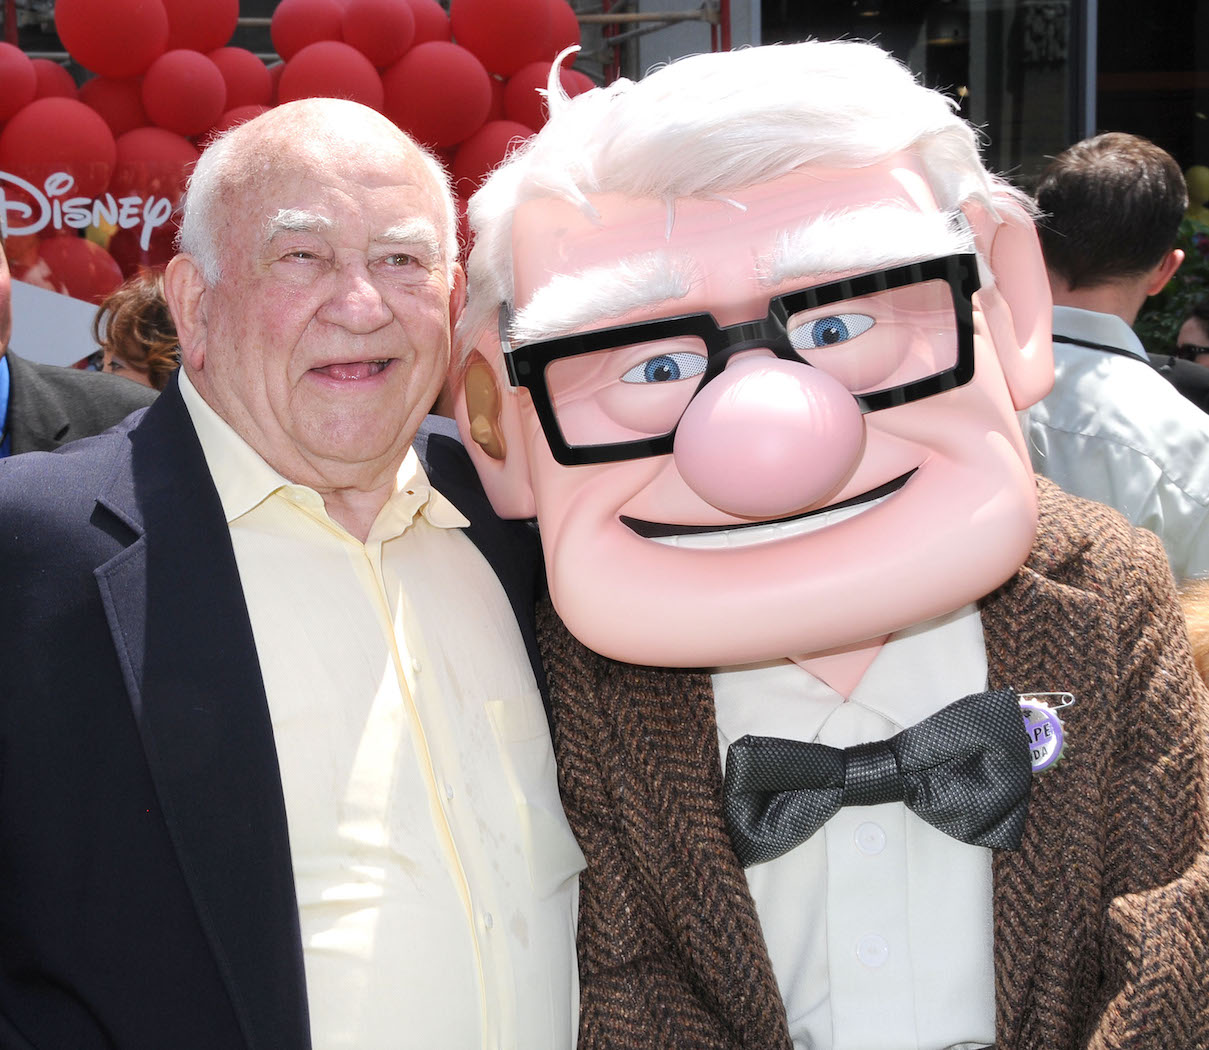 Ed Asner arrives at the premiere of 'Up'